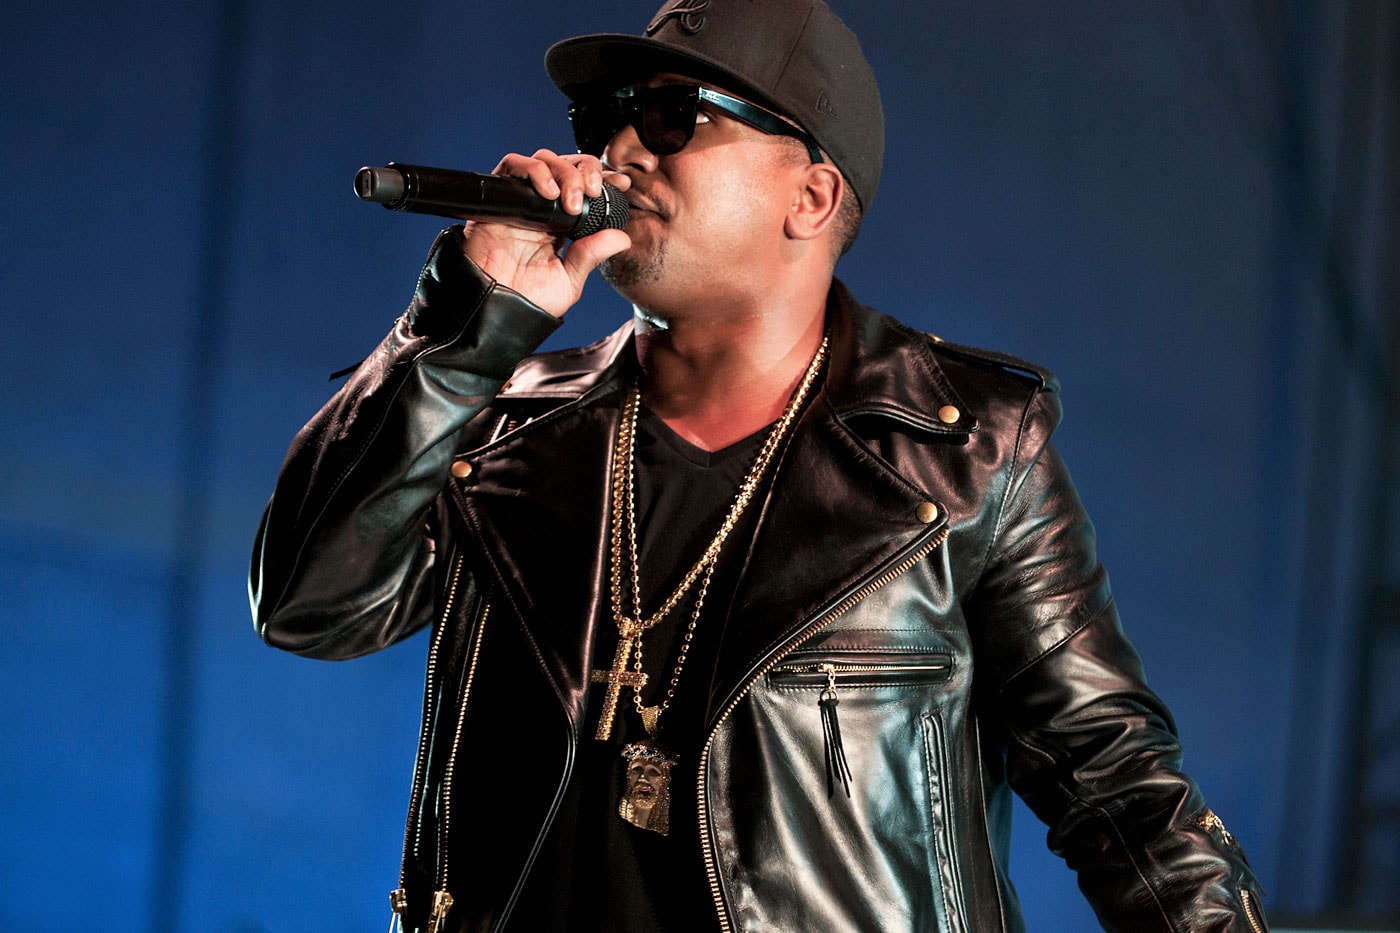 CyHi The Prynce Trolled Everybody on His Kanye West "Diss"